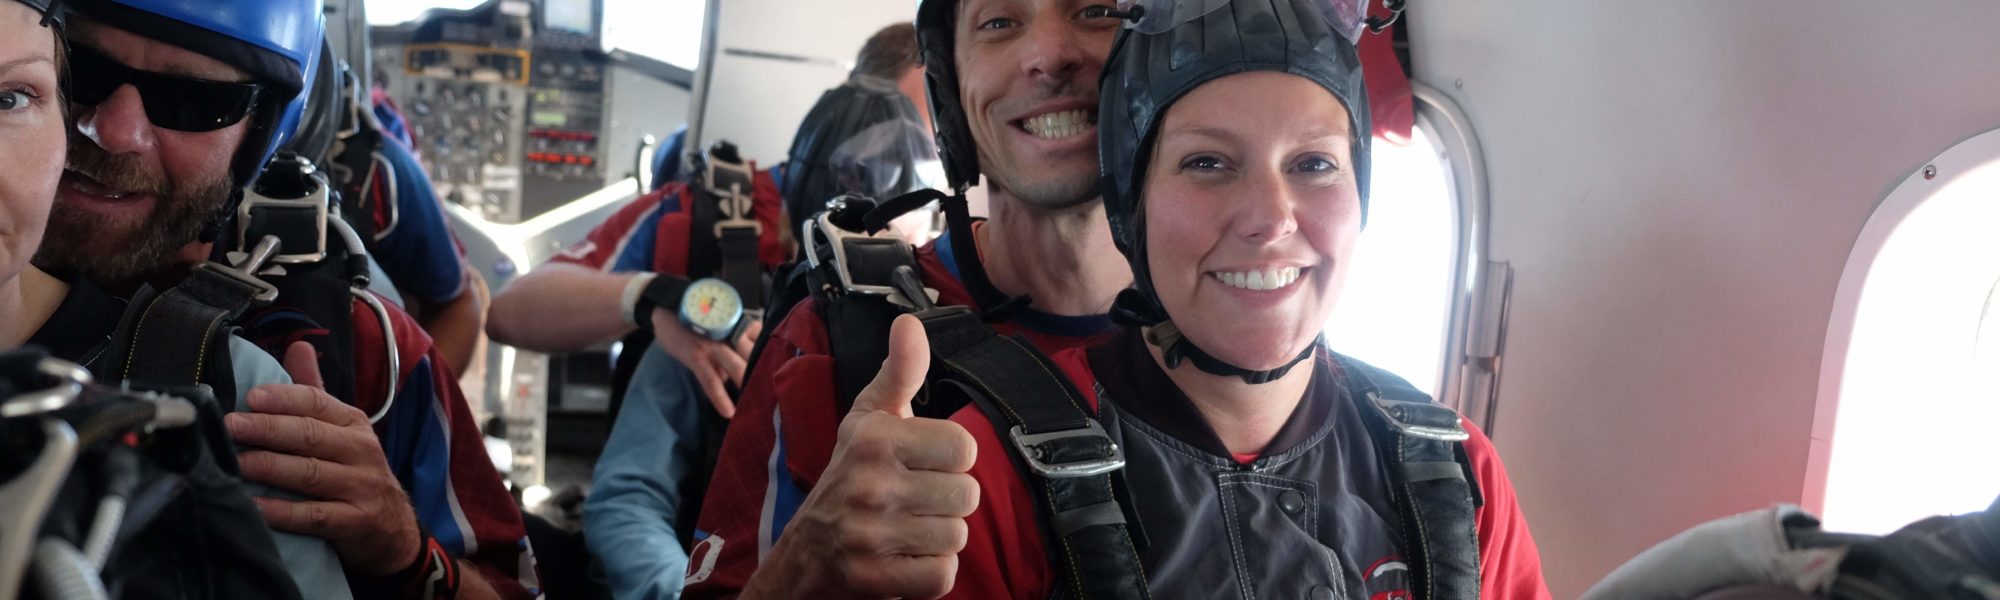 group skydiving jump out of a plane